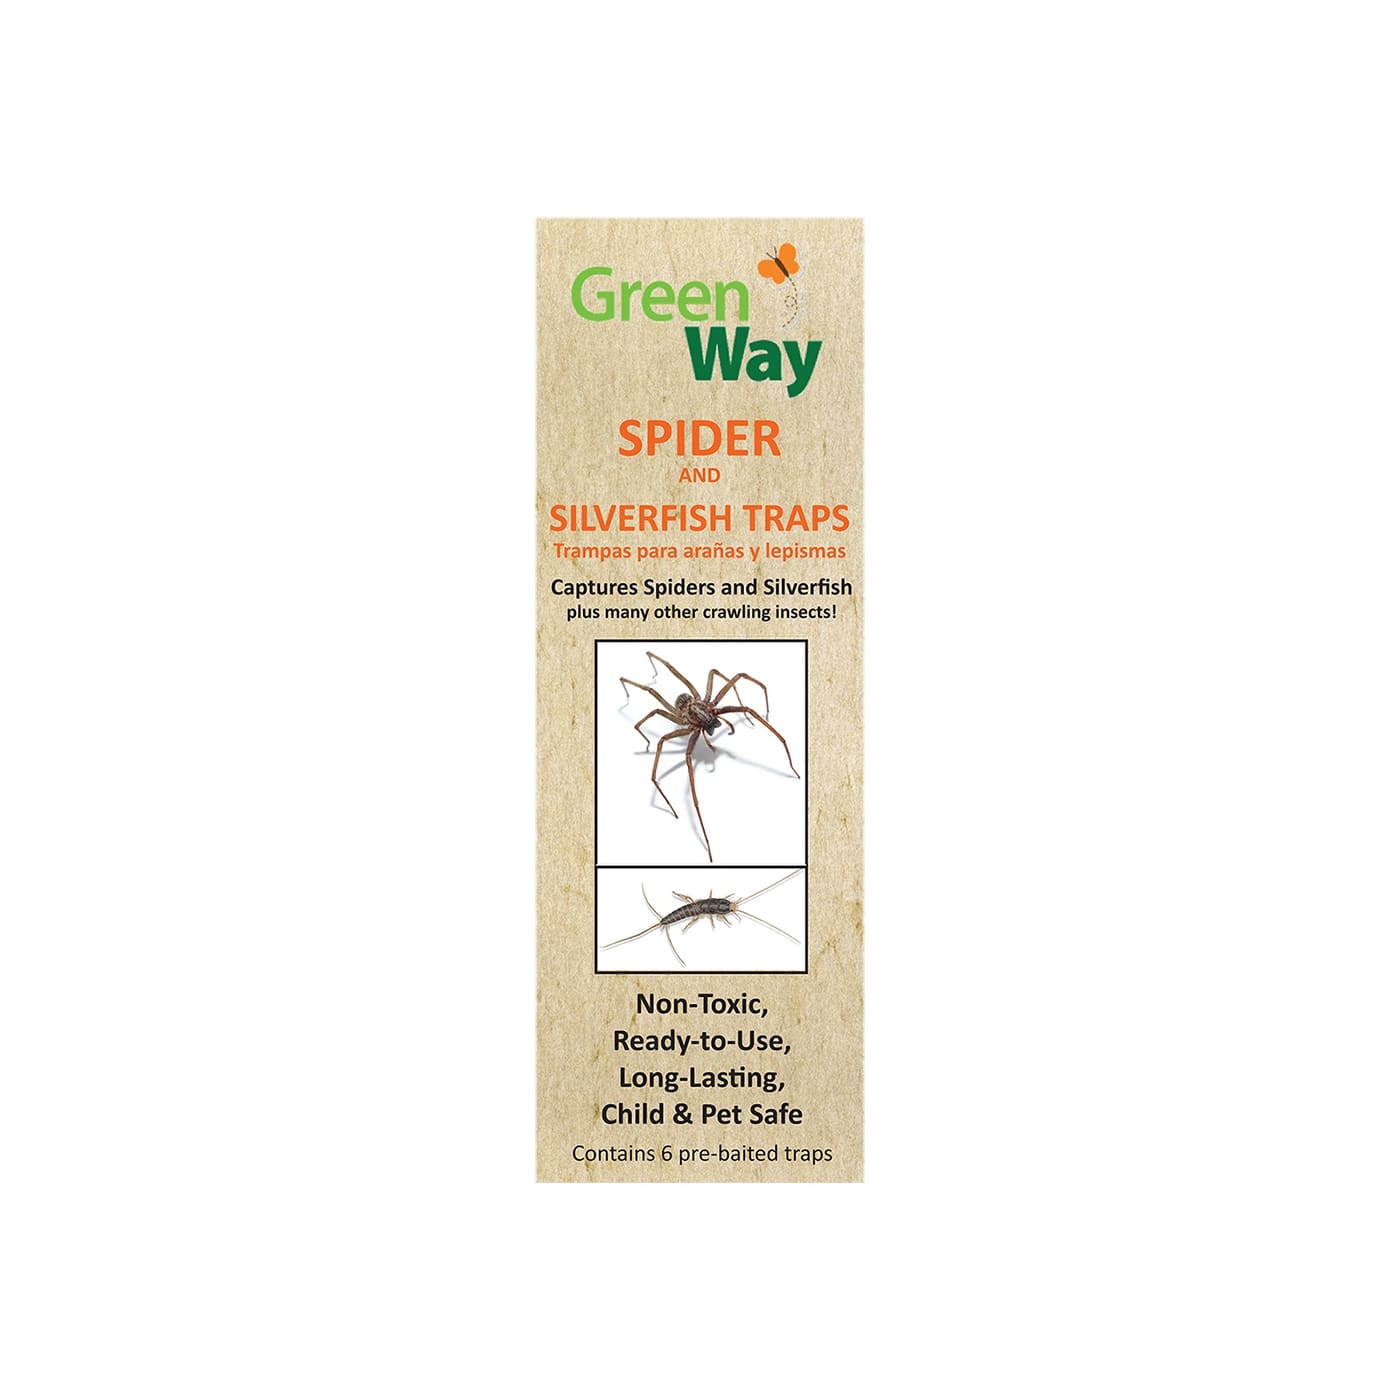 Greenway Spider and Silverfish Trap